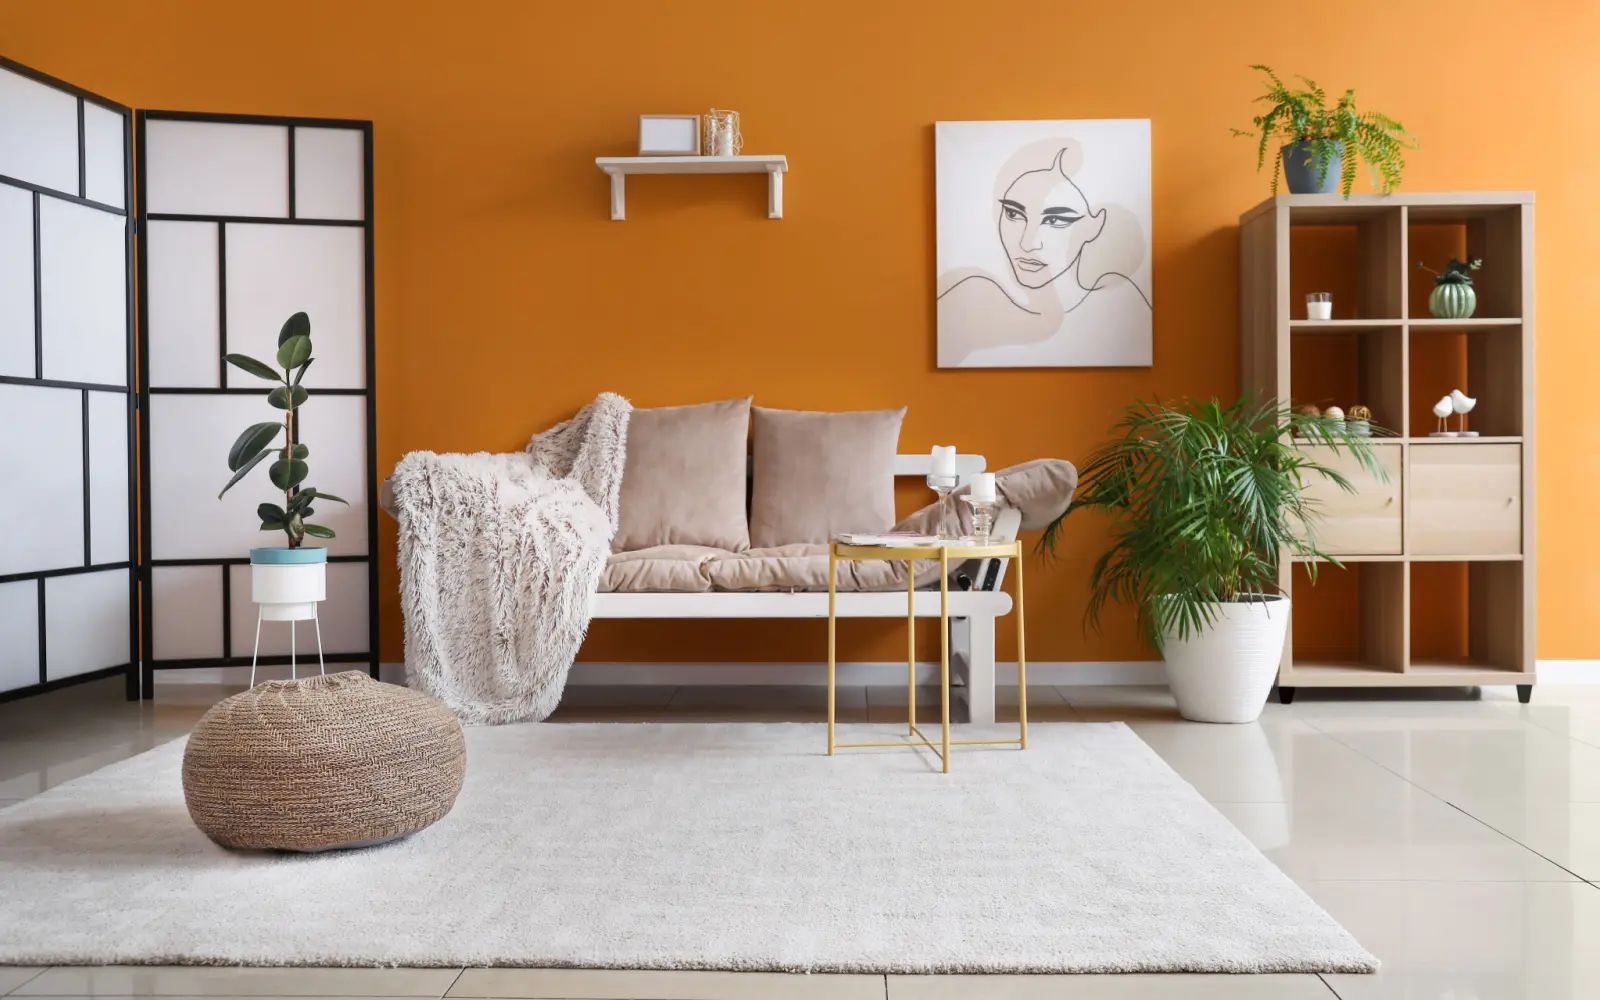 Burnt orange walls with decorations in several colors that go with it in a living room